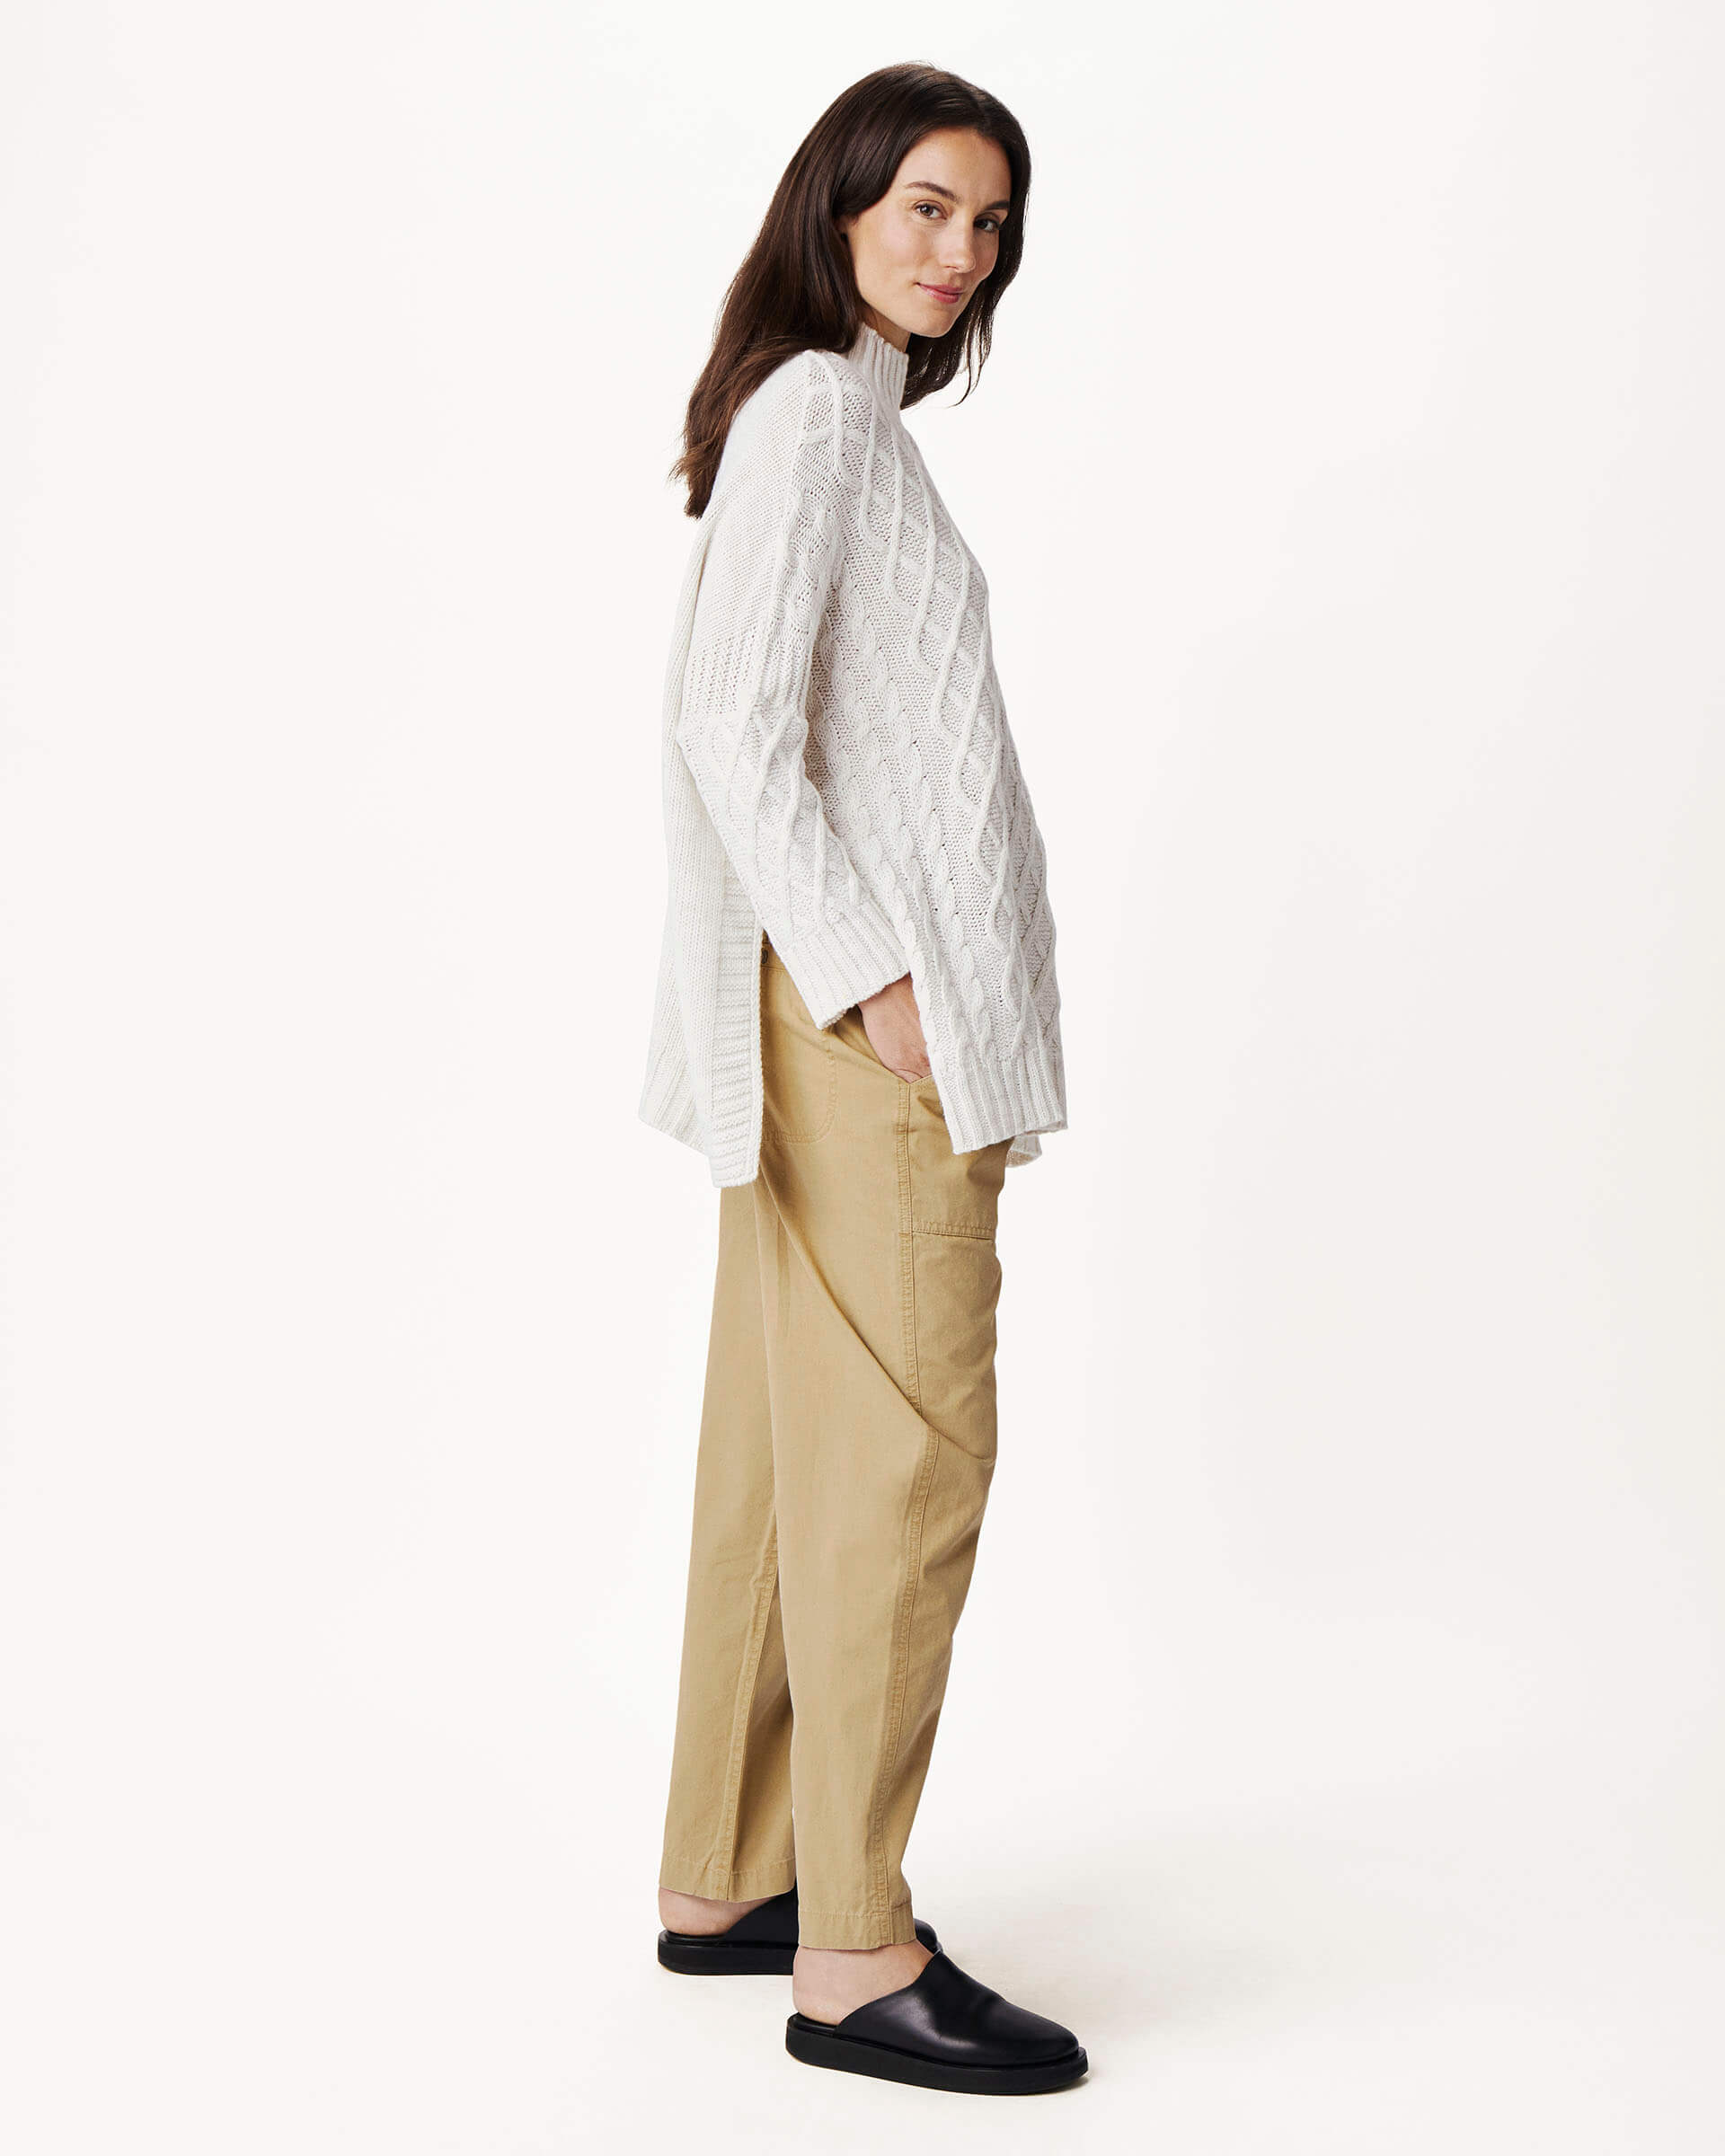 brunette female wearing white sweater turned sideways with hand in pocket on a white background